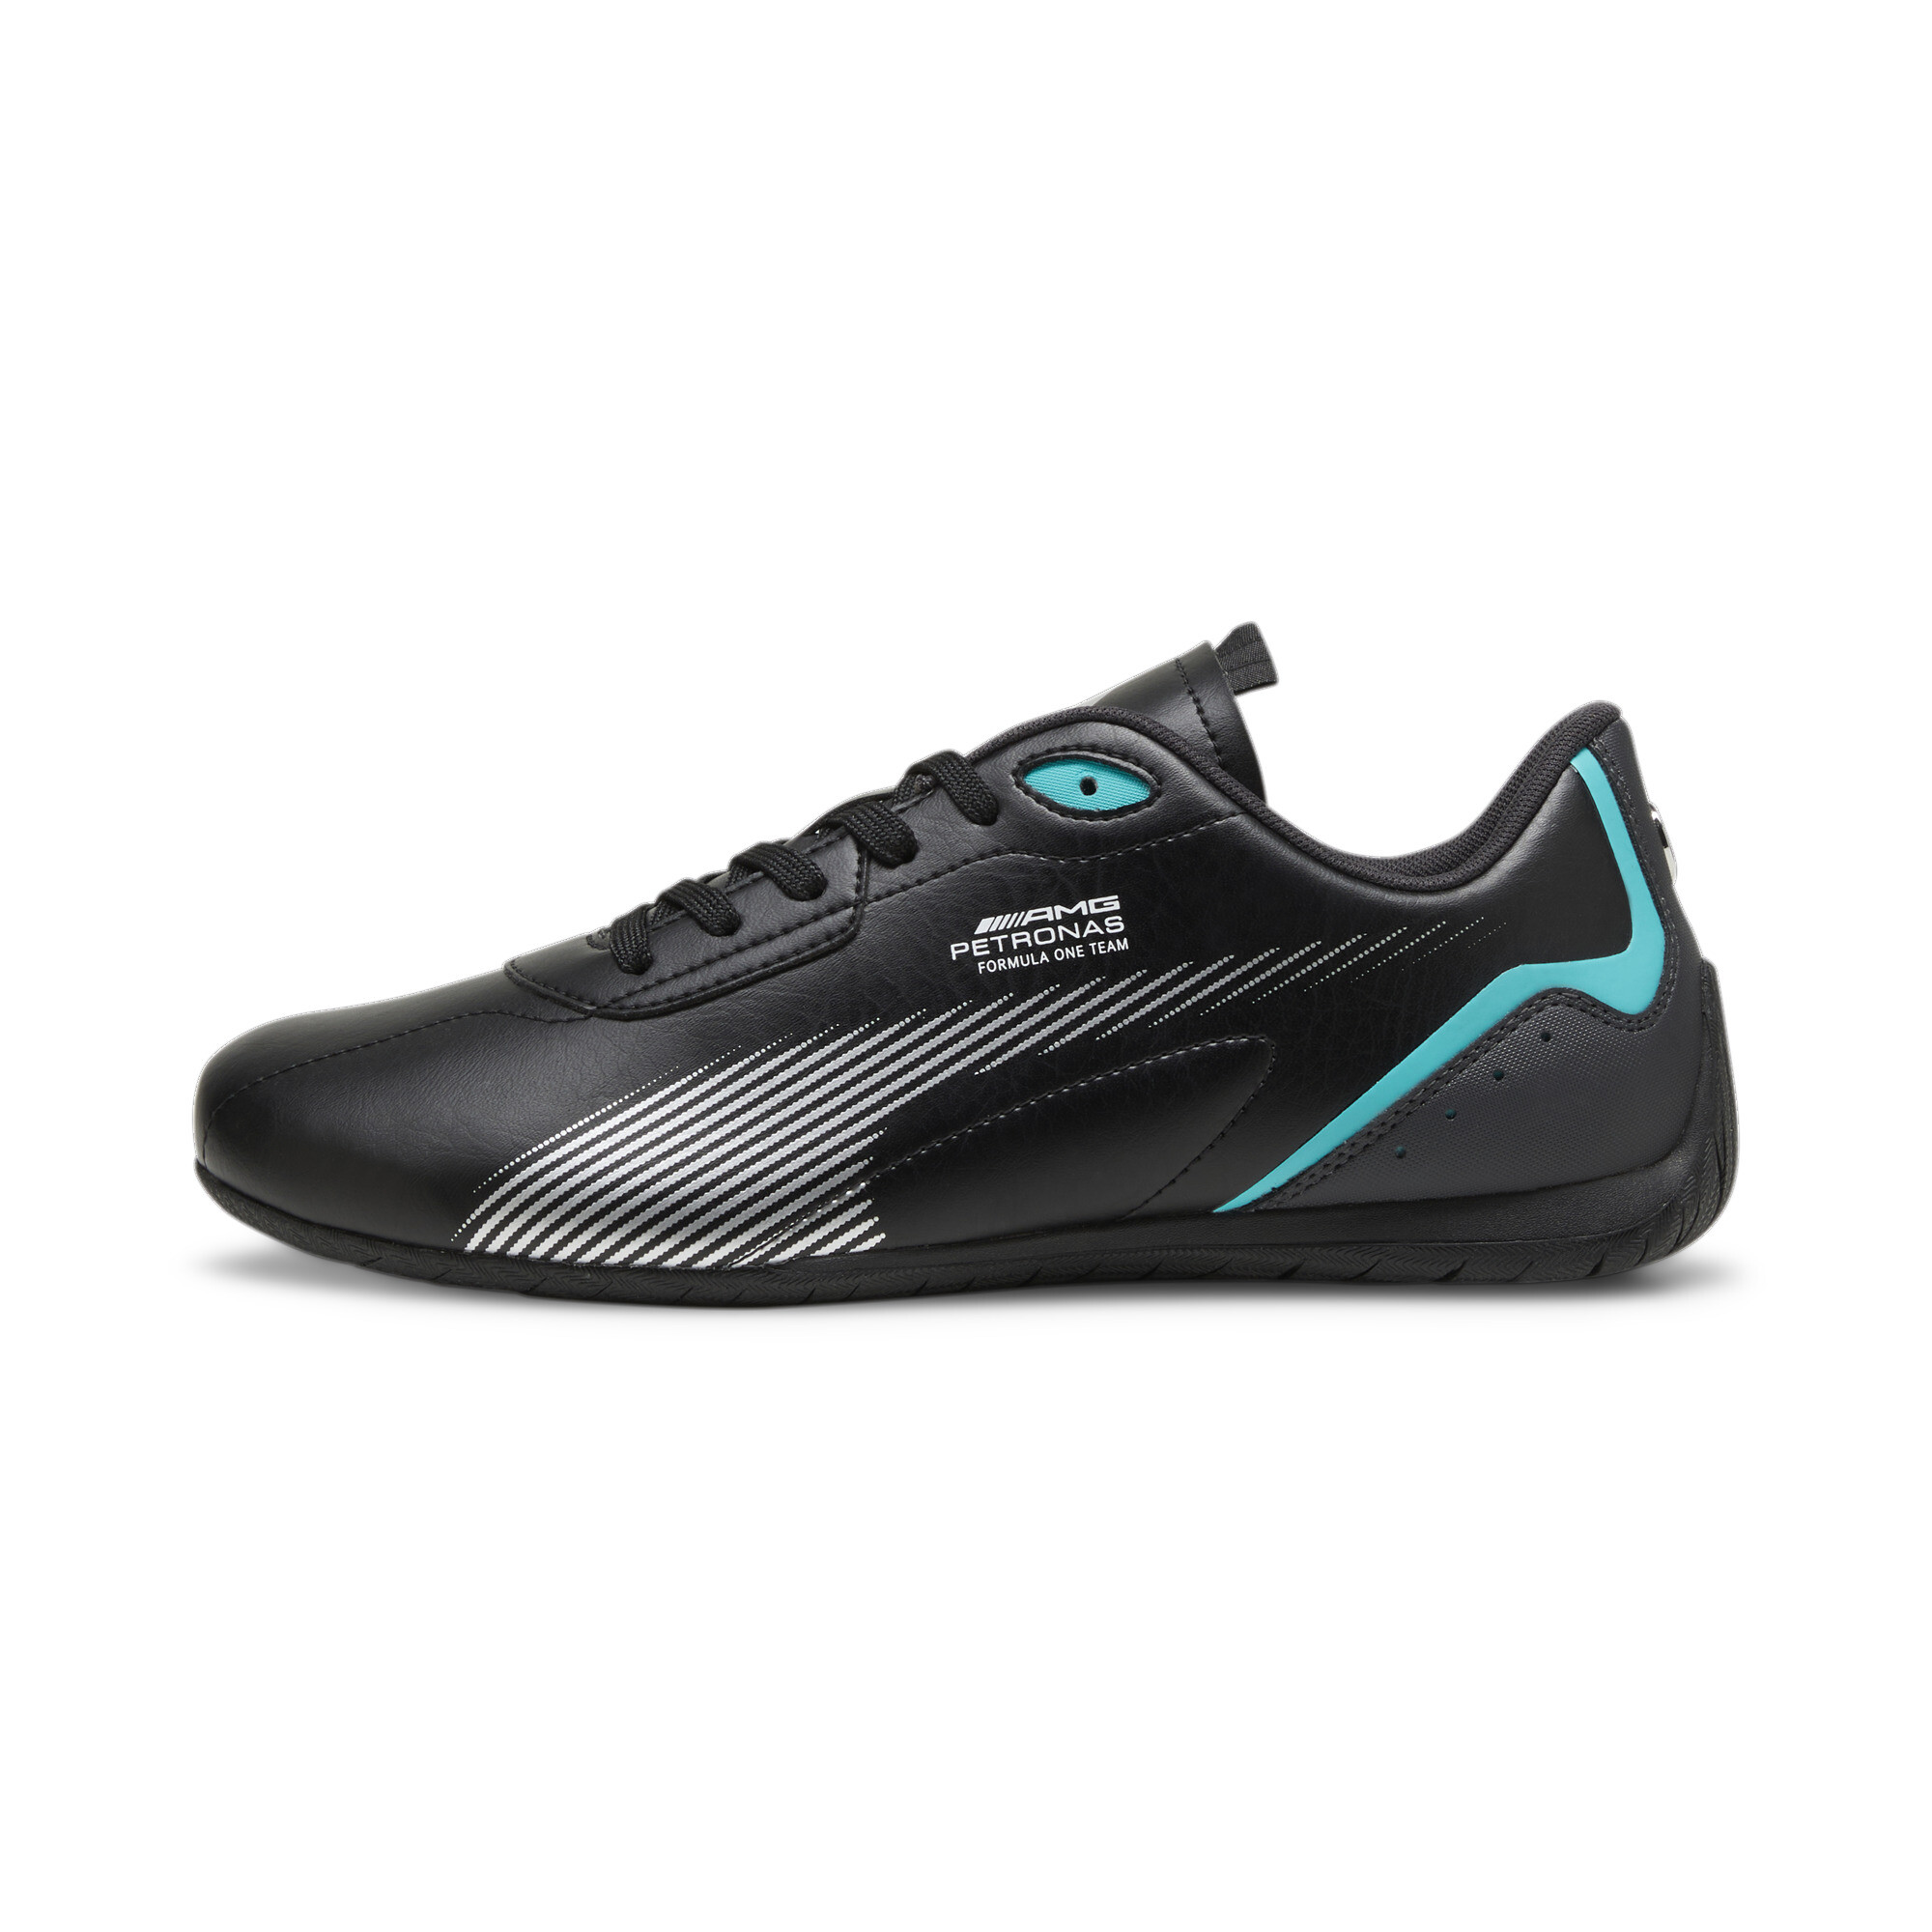 Mercedes-AMG PETRONAS Neo Cat 2.0 Driving Shoes